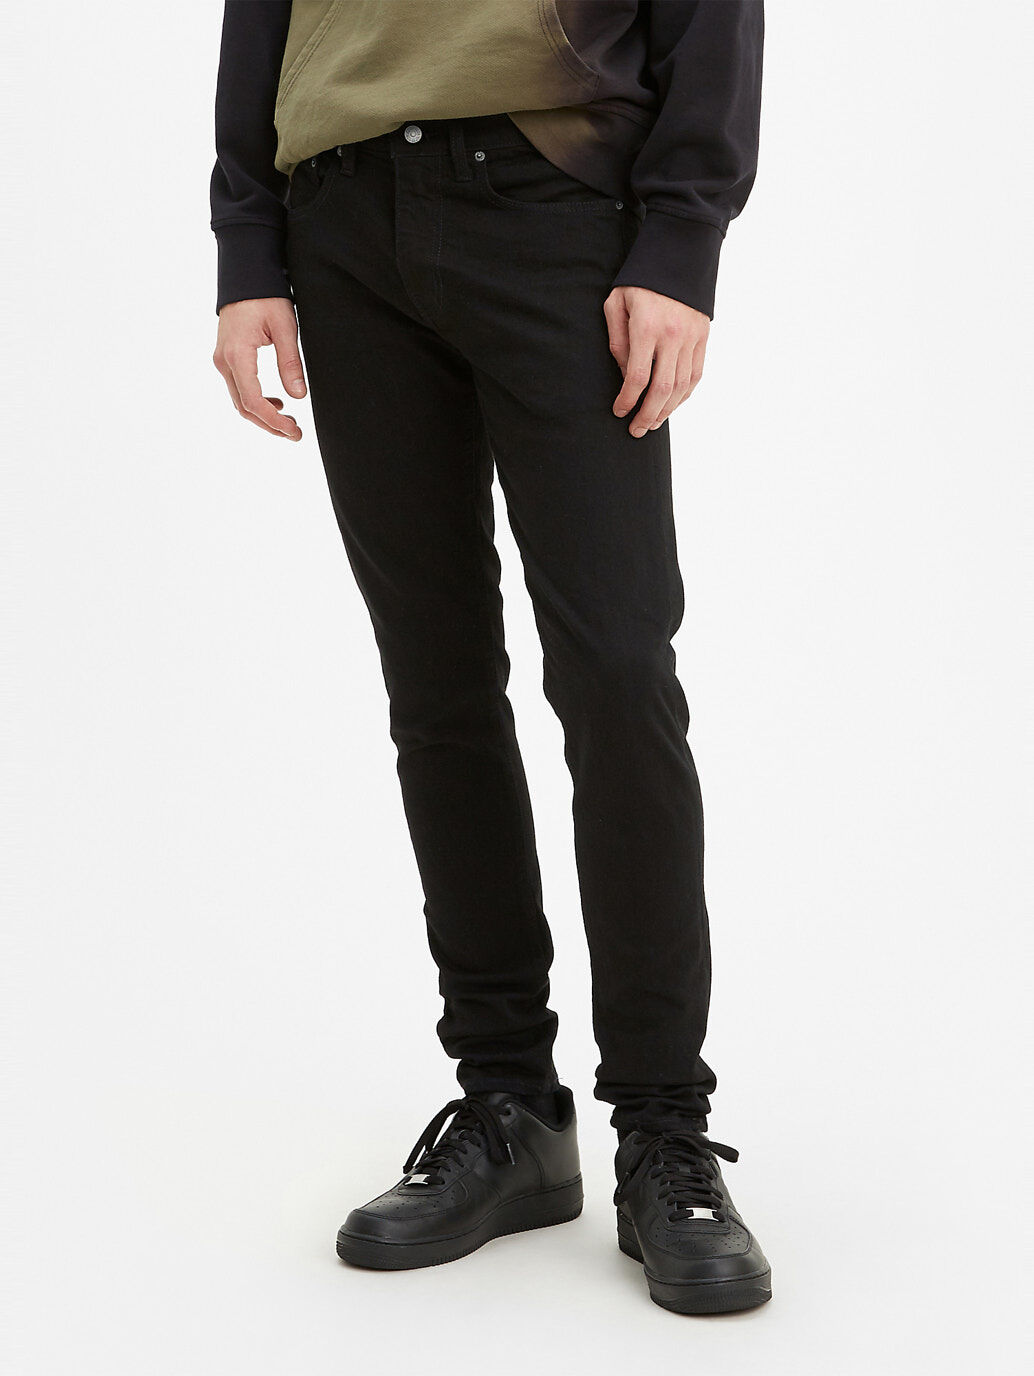 levis tapered mens